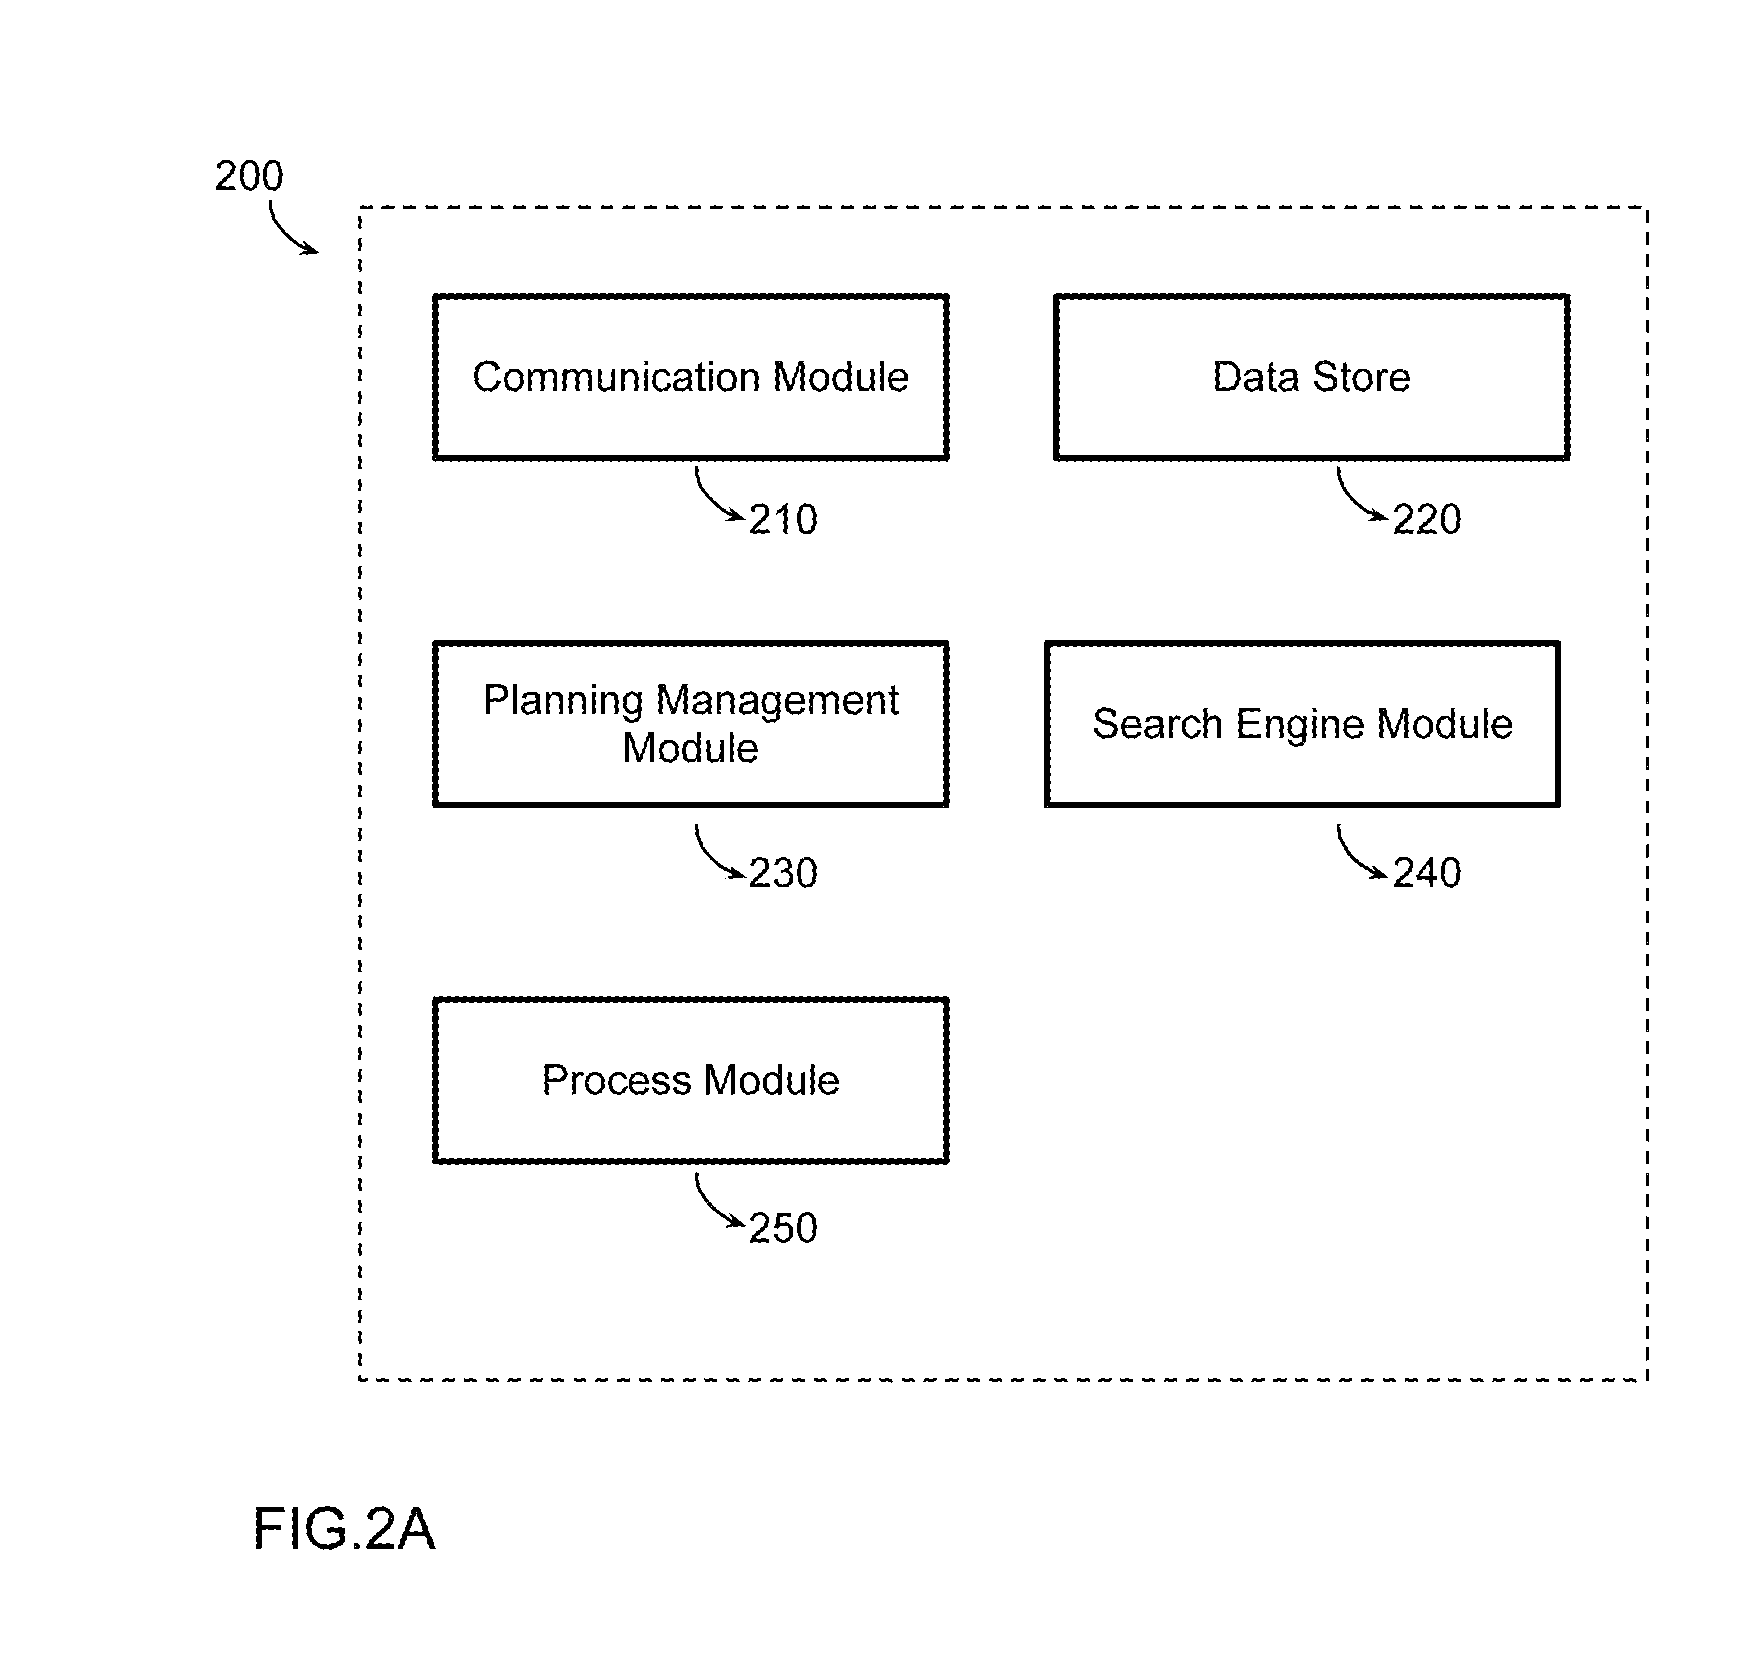 System and method for provising advanced job-time planning and search services for employment services